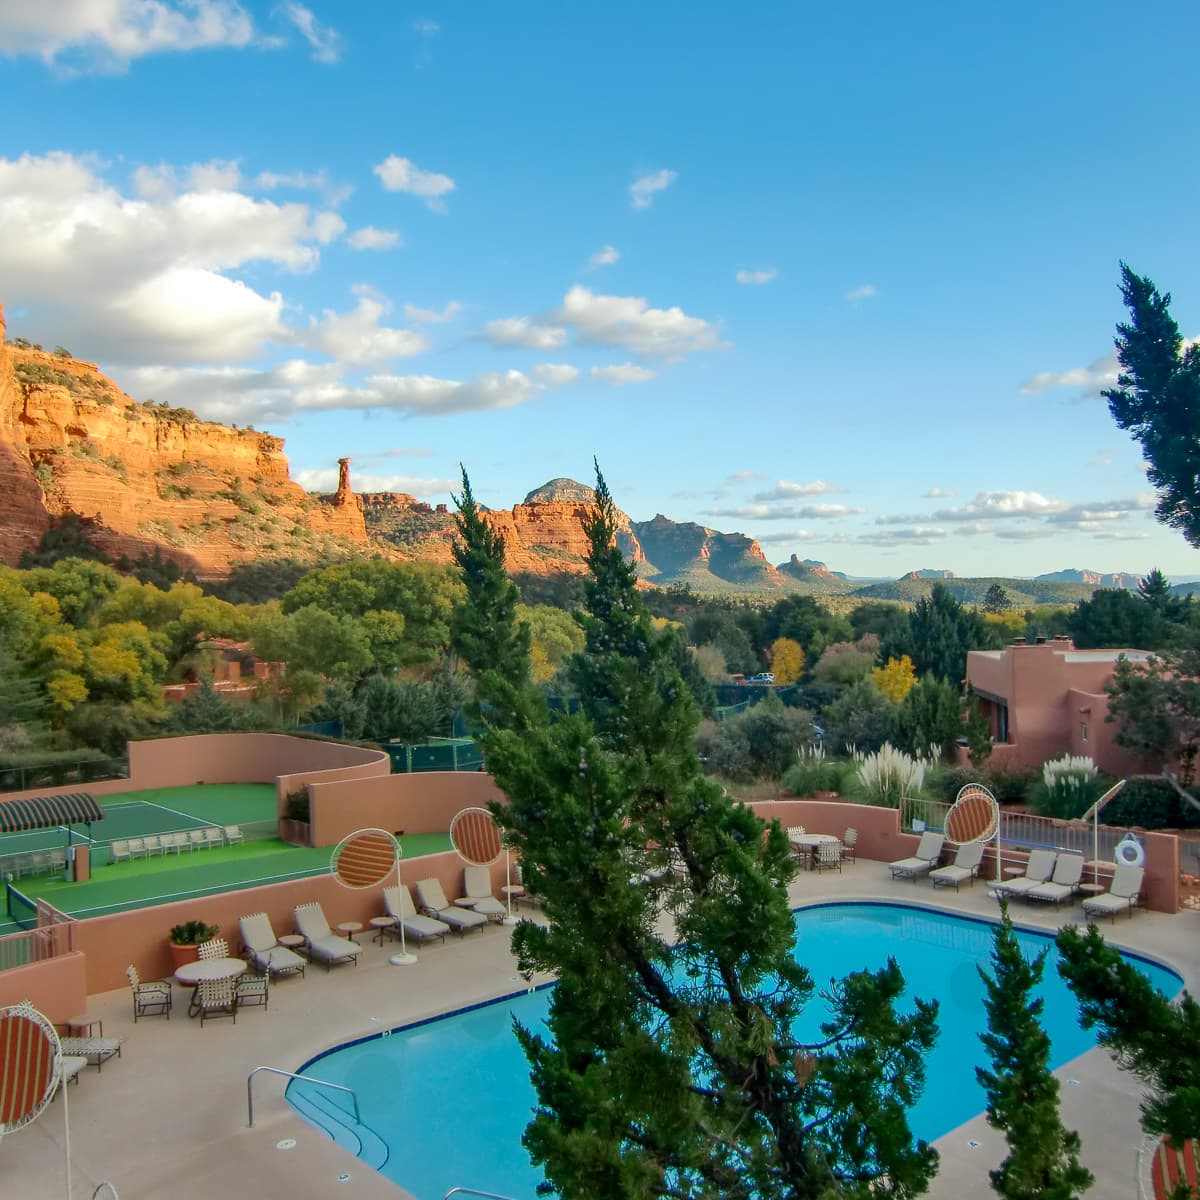 Enchantment Resort Sedona Review (for Families)